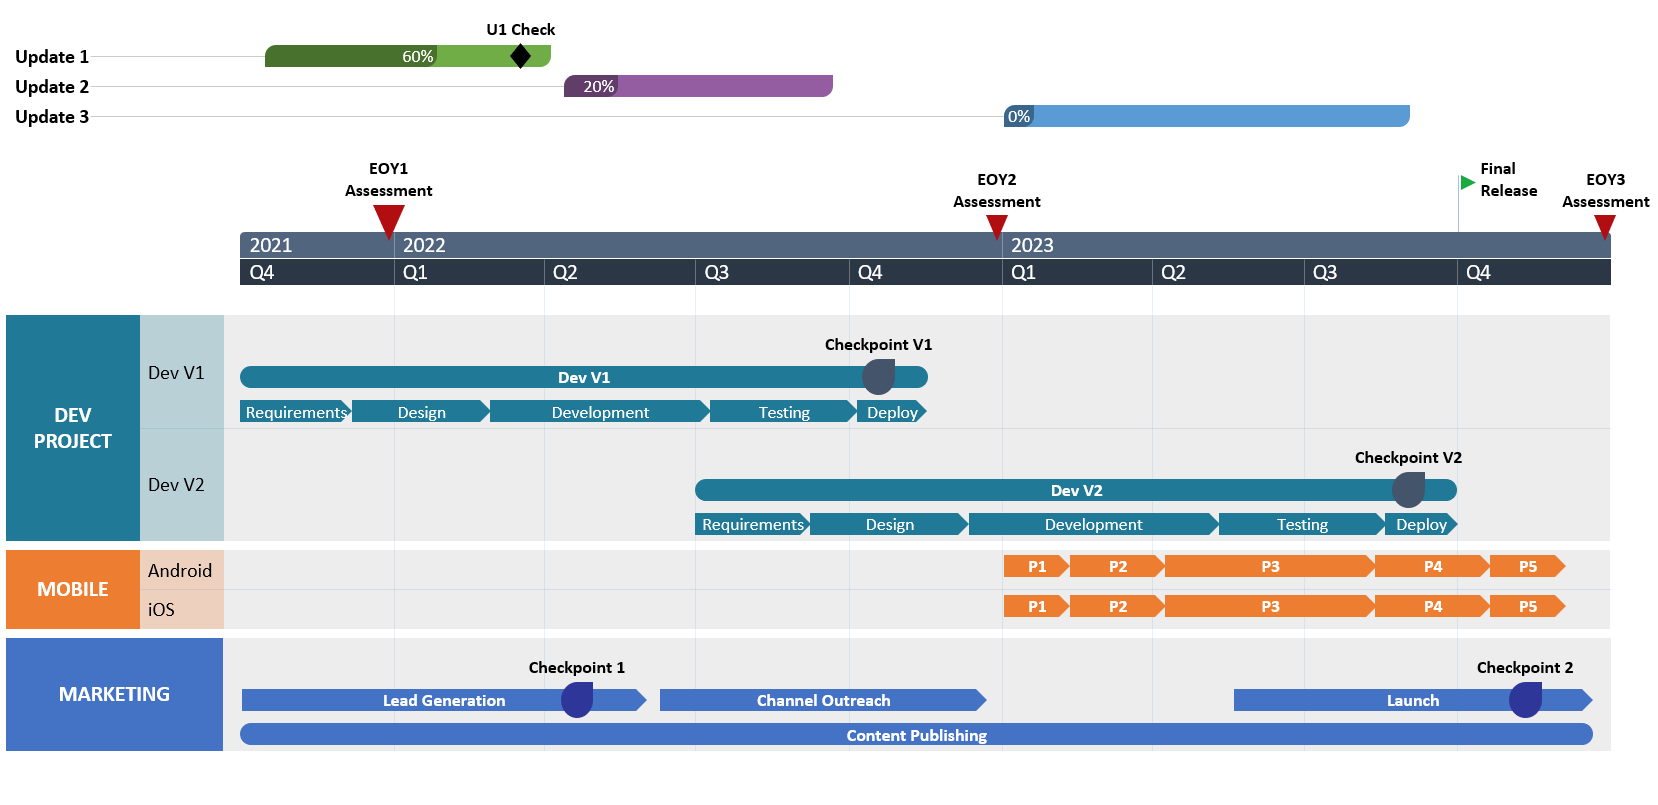 Timeline example made with Office Timeline add-in